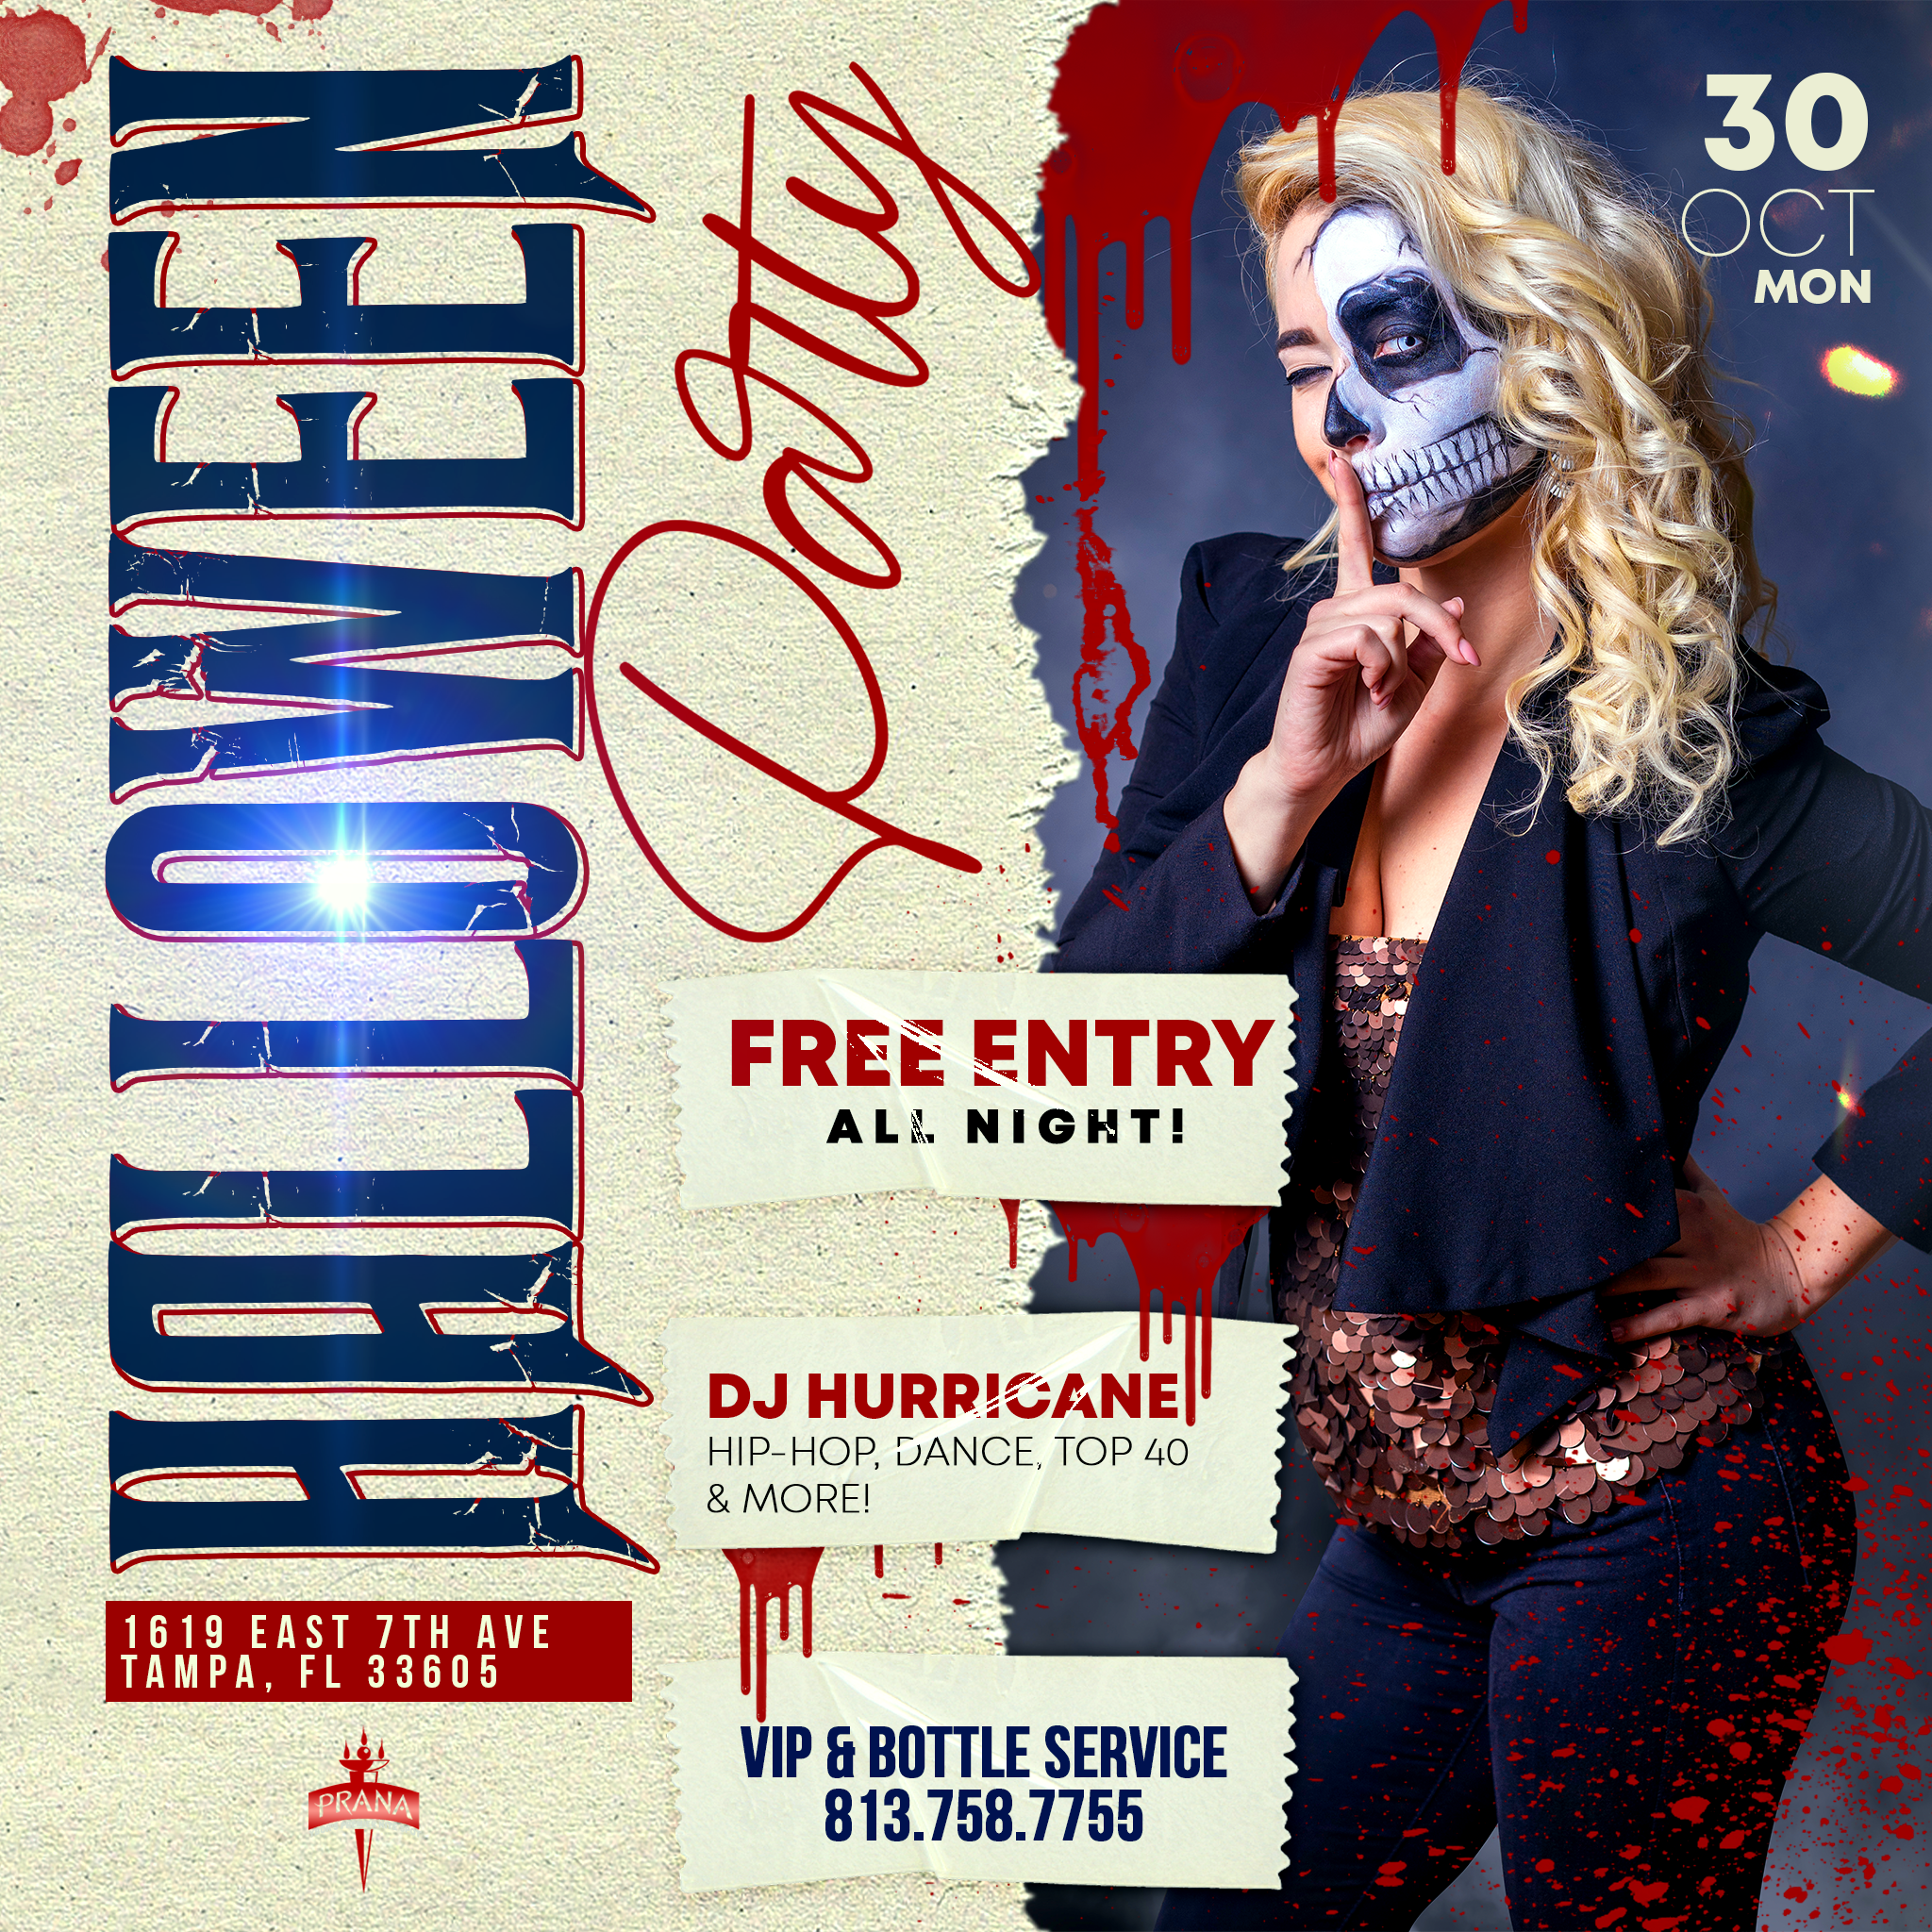 Monday Night Halloween Pre-Party | Free Entry – CANCELLED